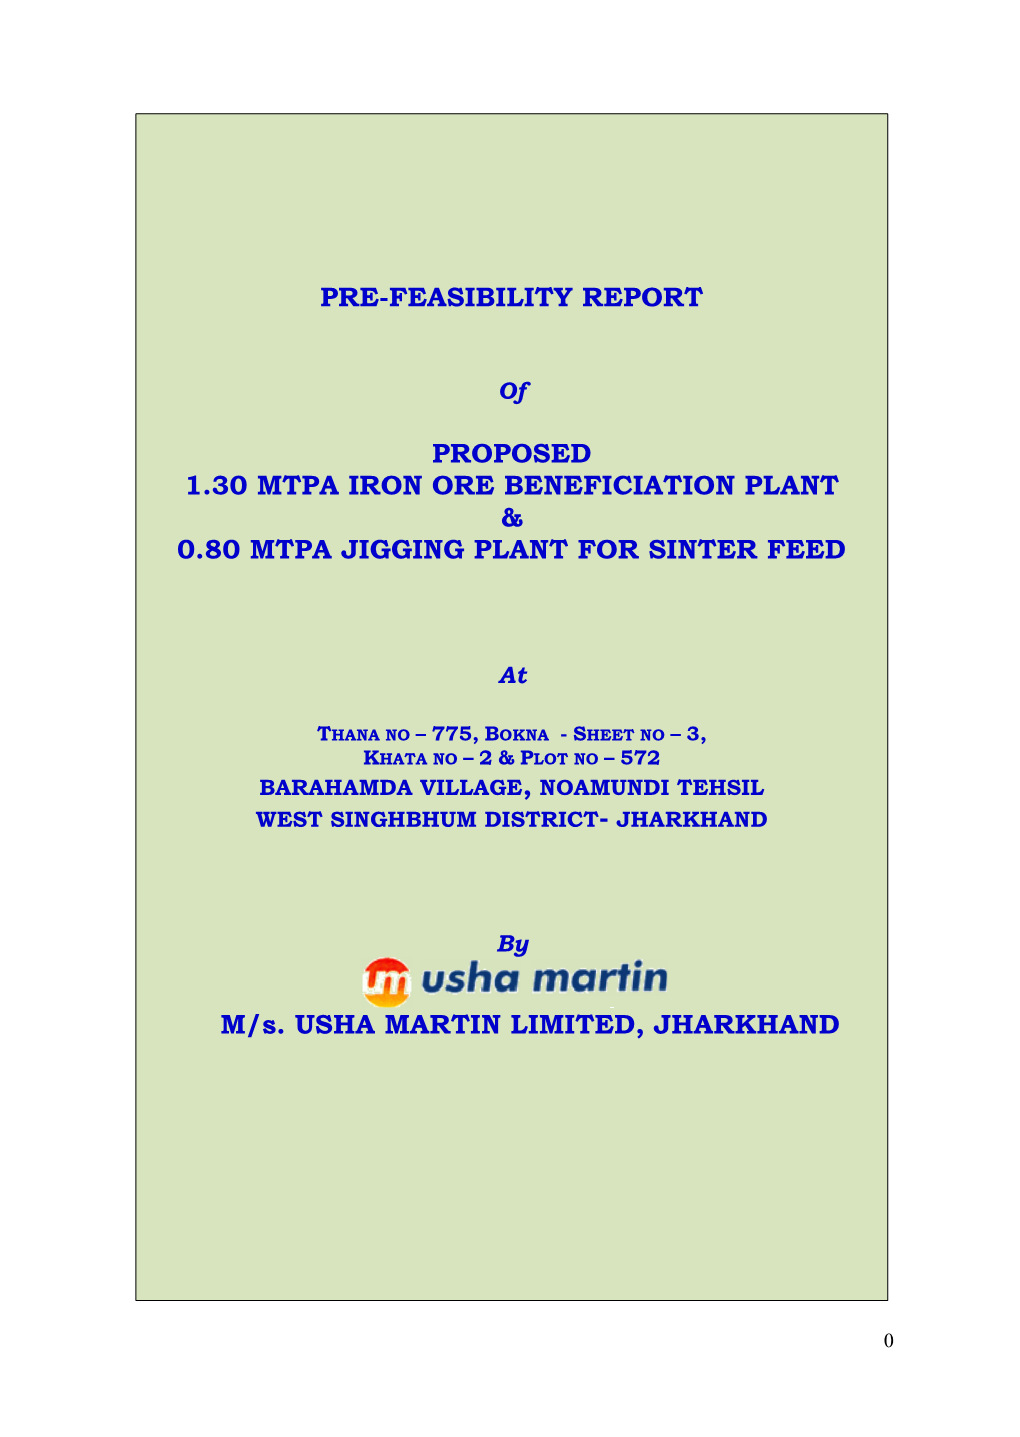 Pre-Feasibility Report Proposed 1.30 Mtpa Iron Ore